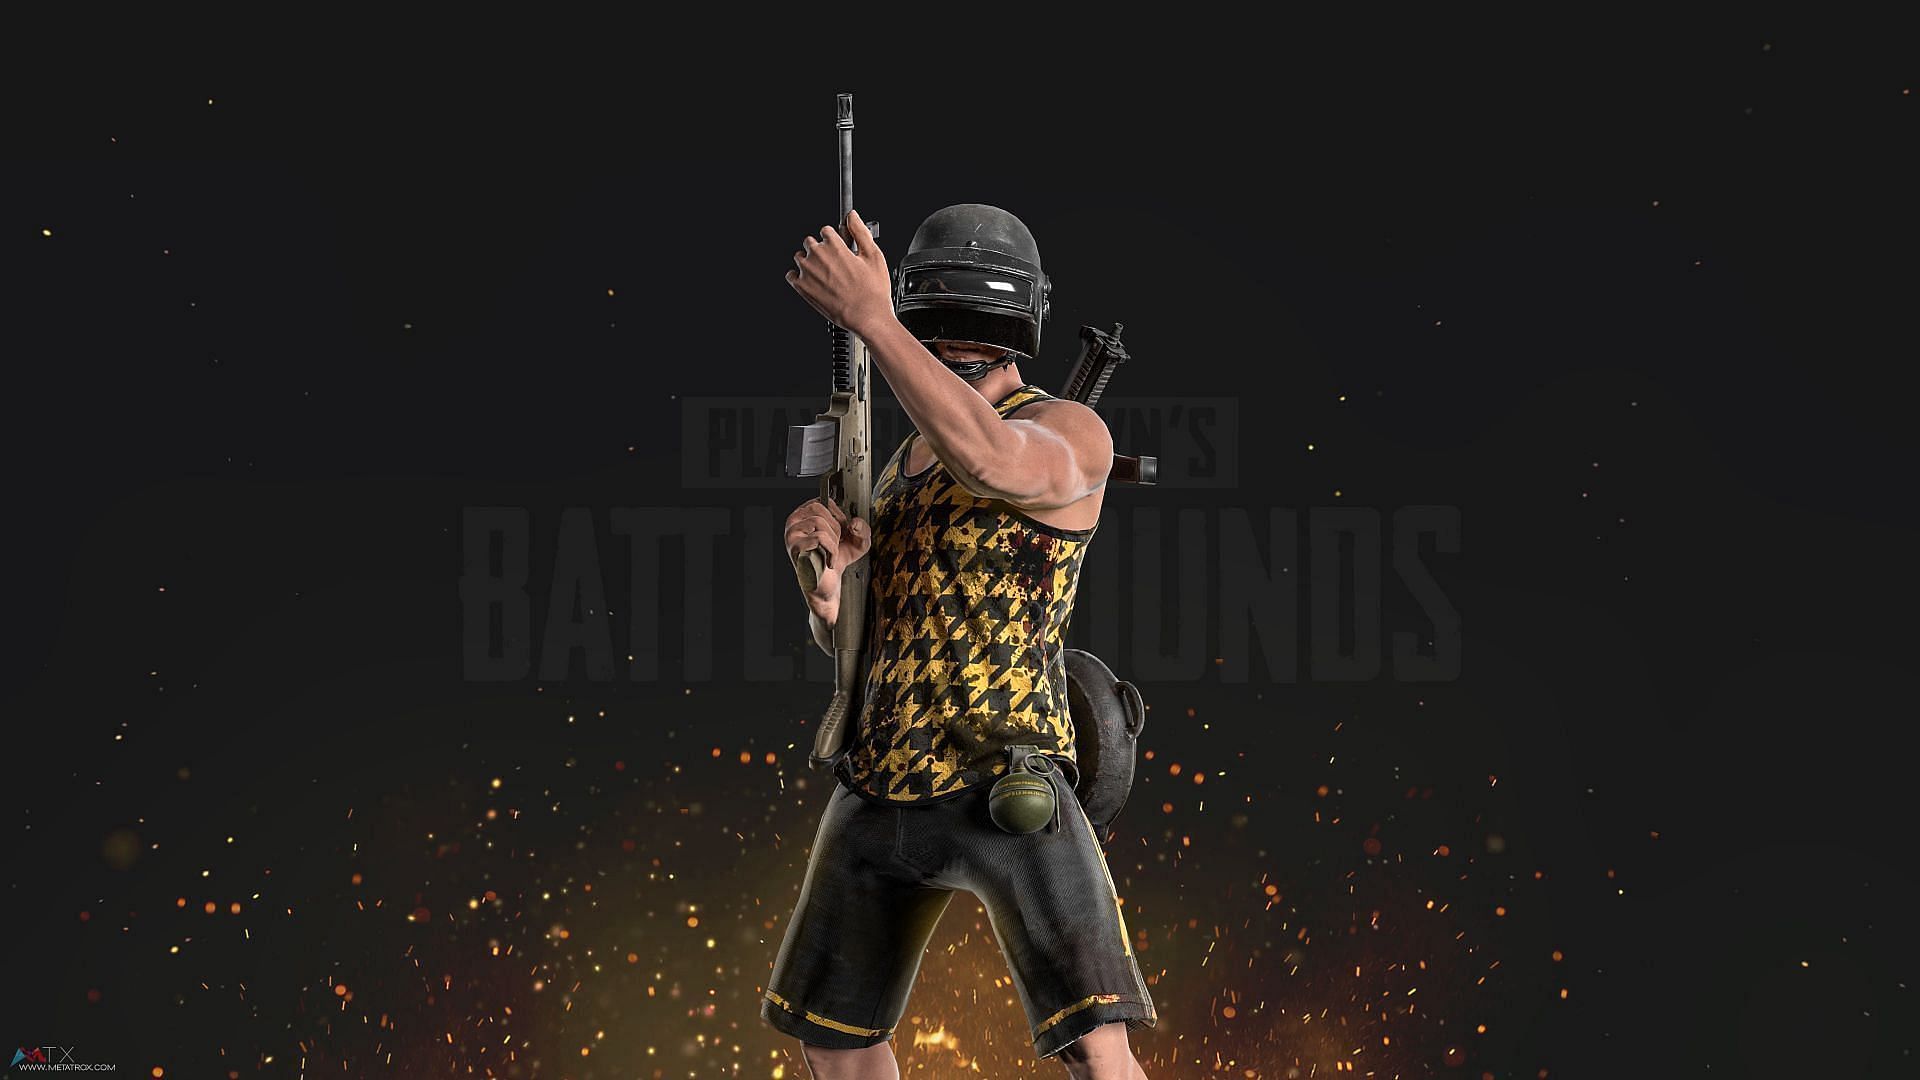 Tactics to avoid dying in PUBG Mobile